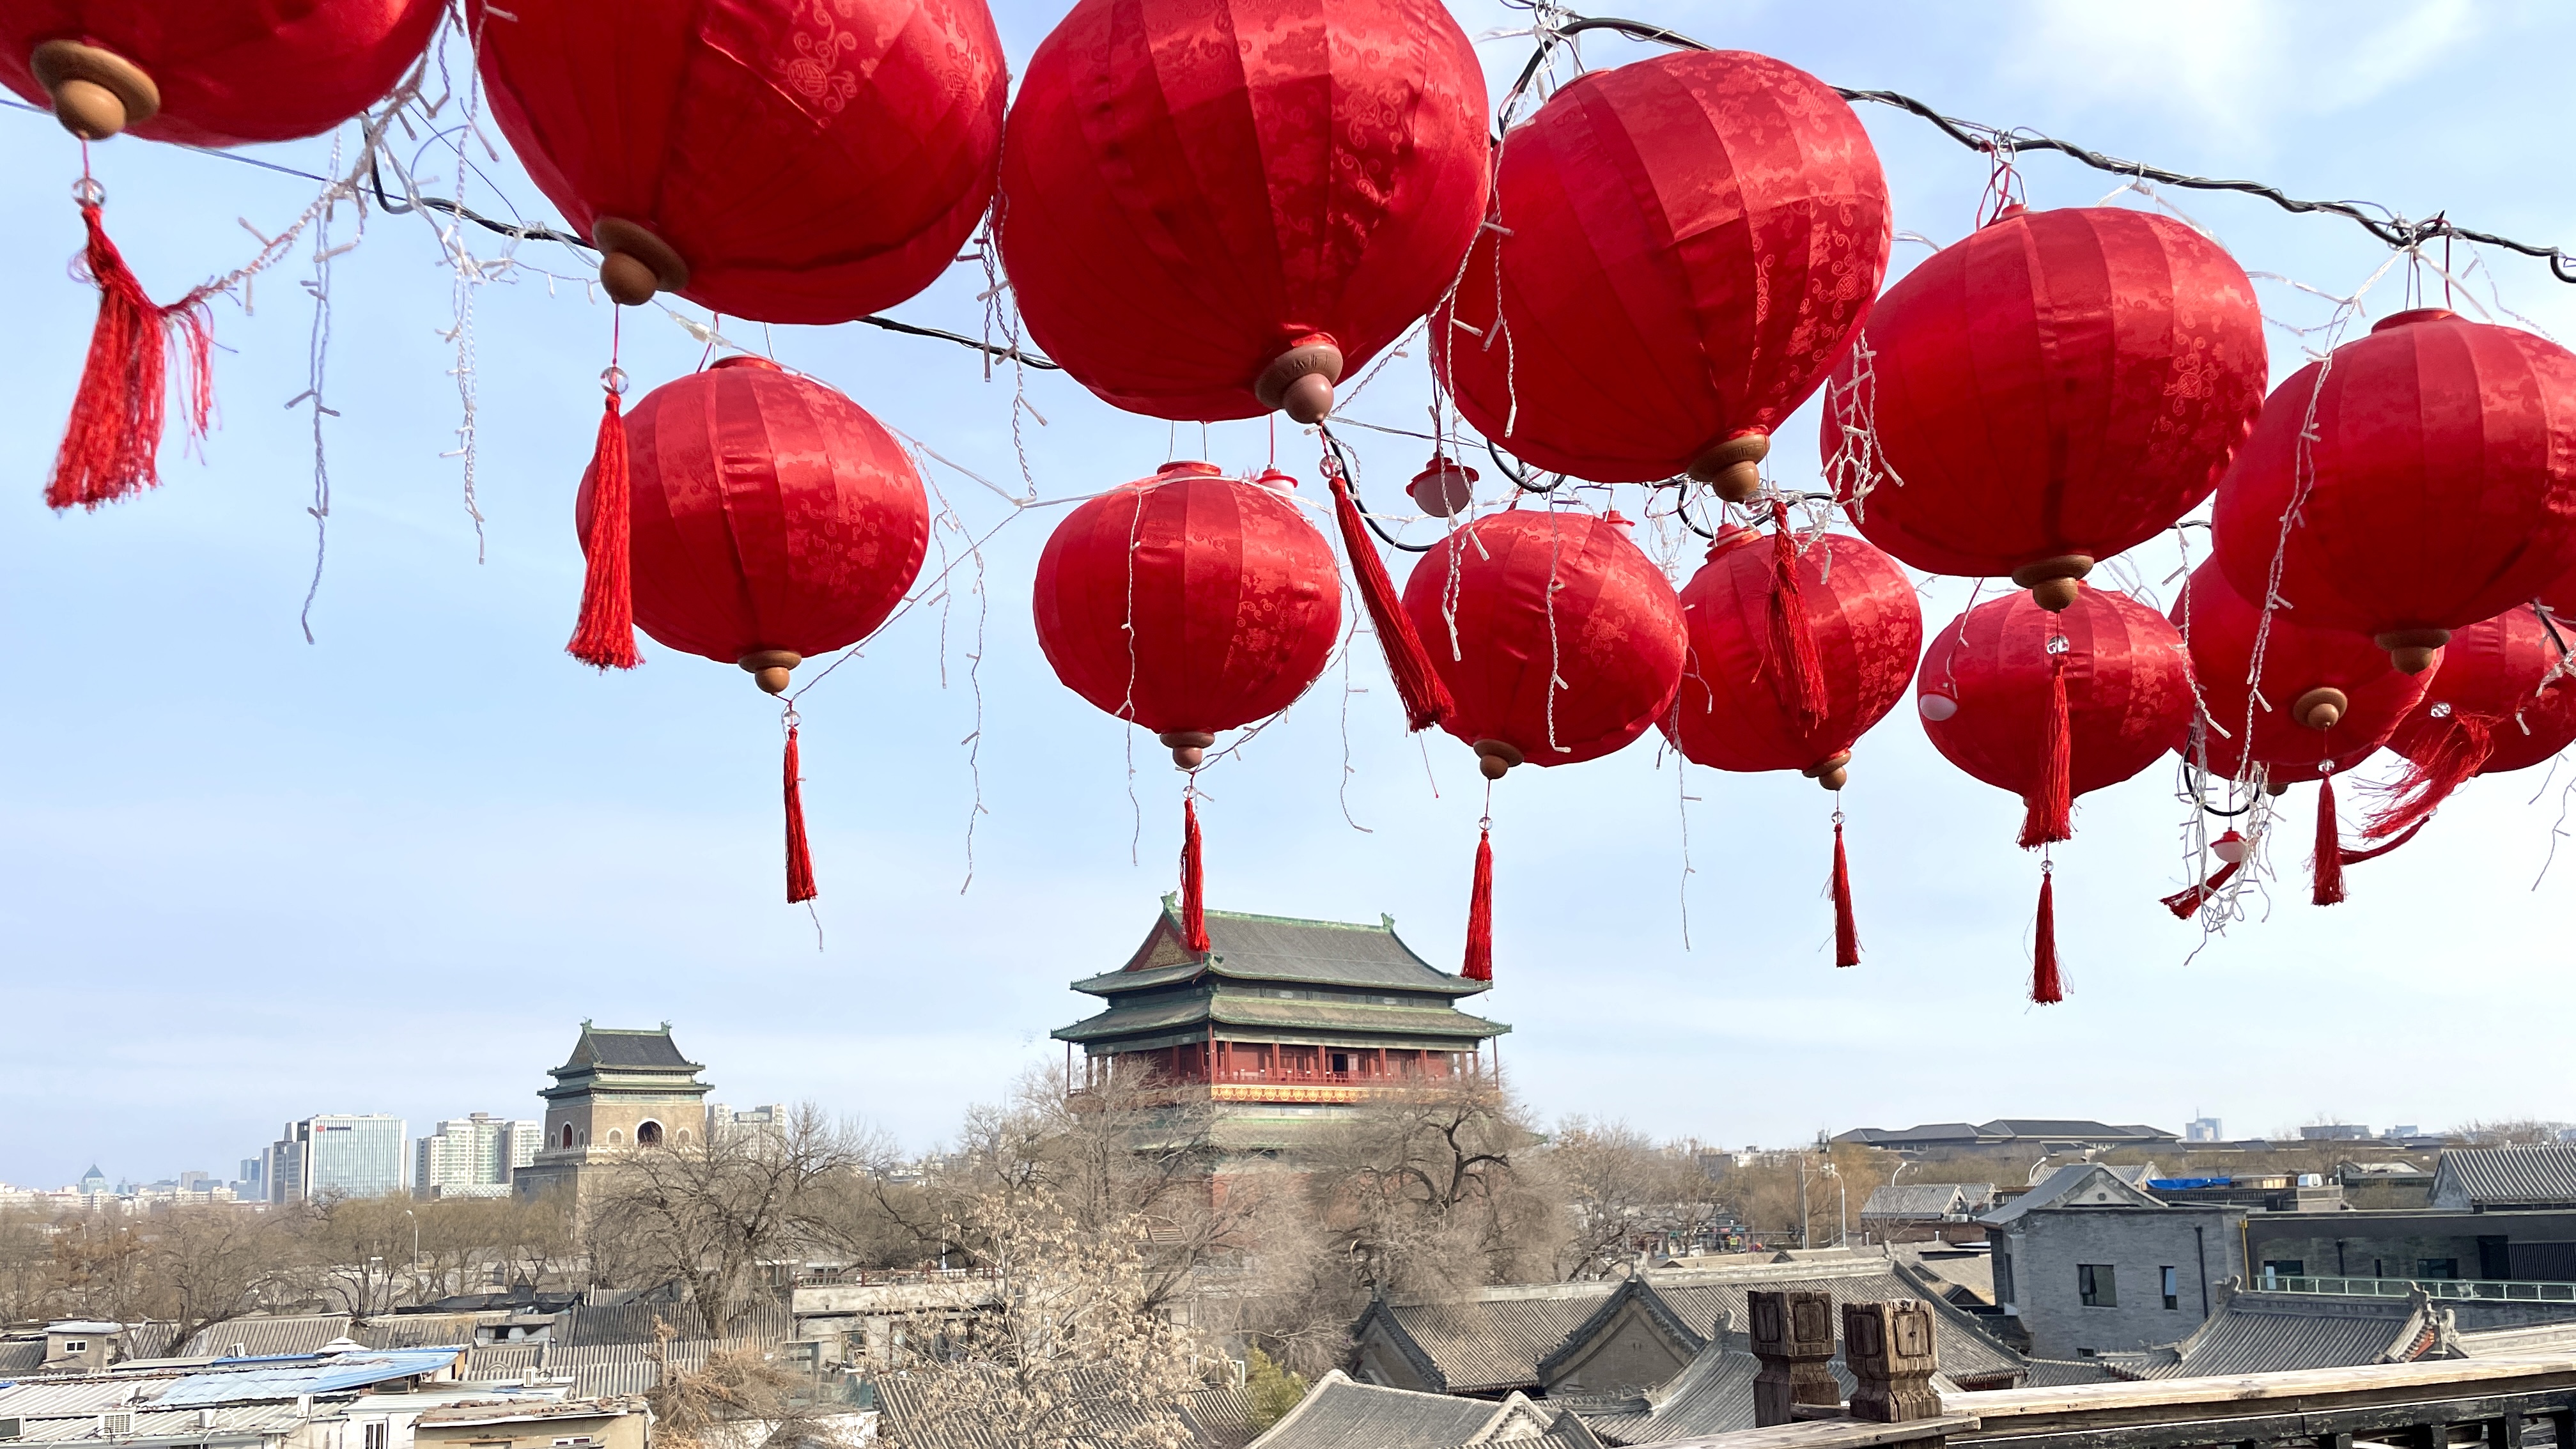 Bright lanterns are seen hanging from a rooftop overlooking Beijing's iconic Bell and Drum Towers. /CGTN